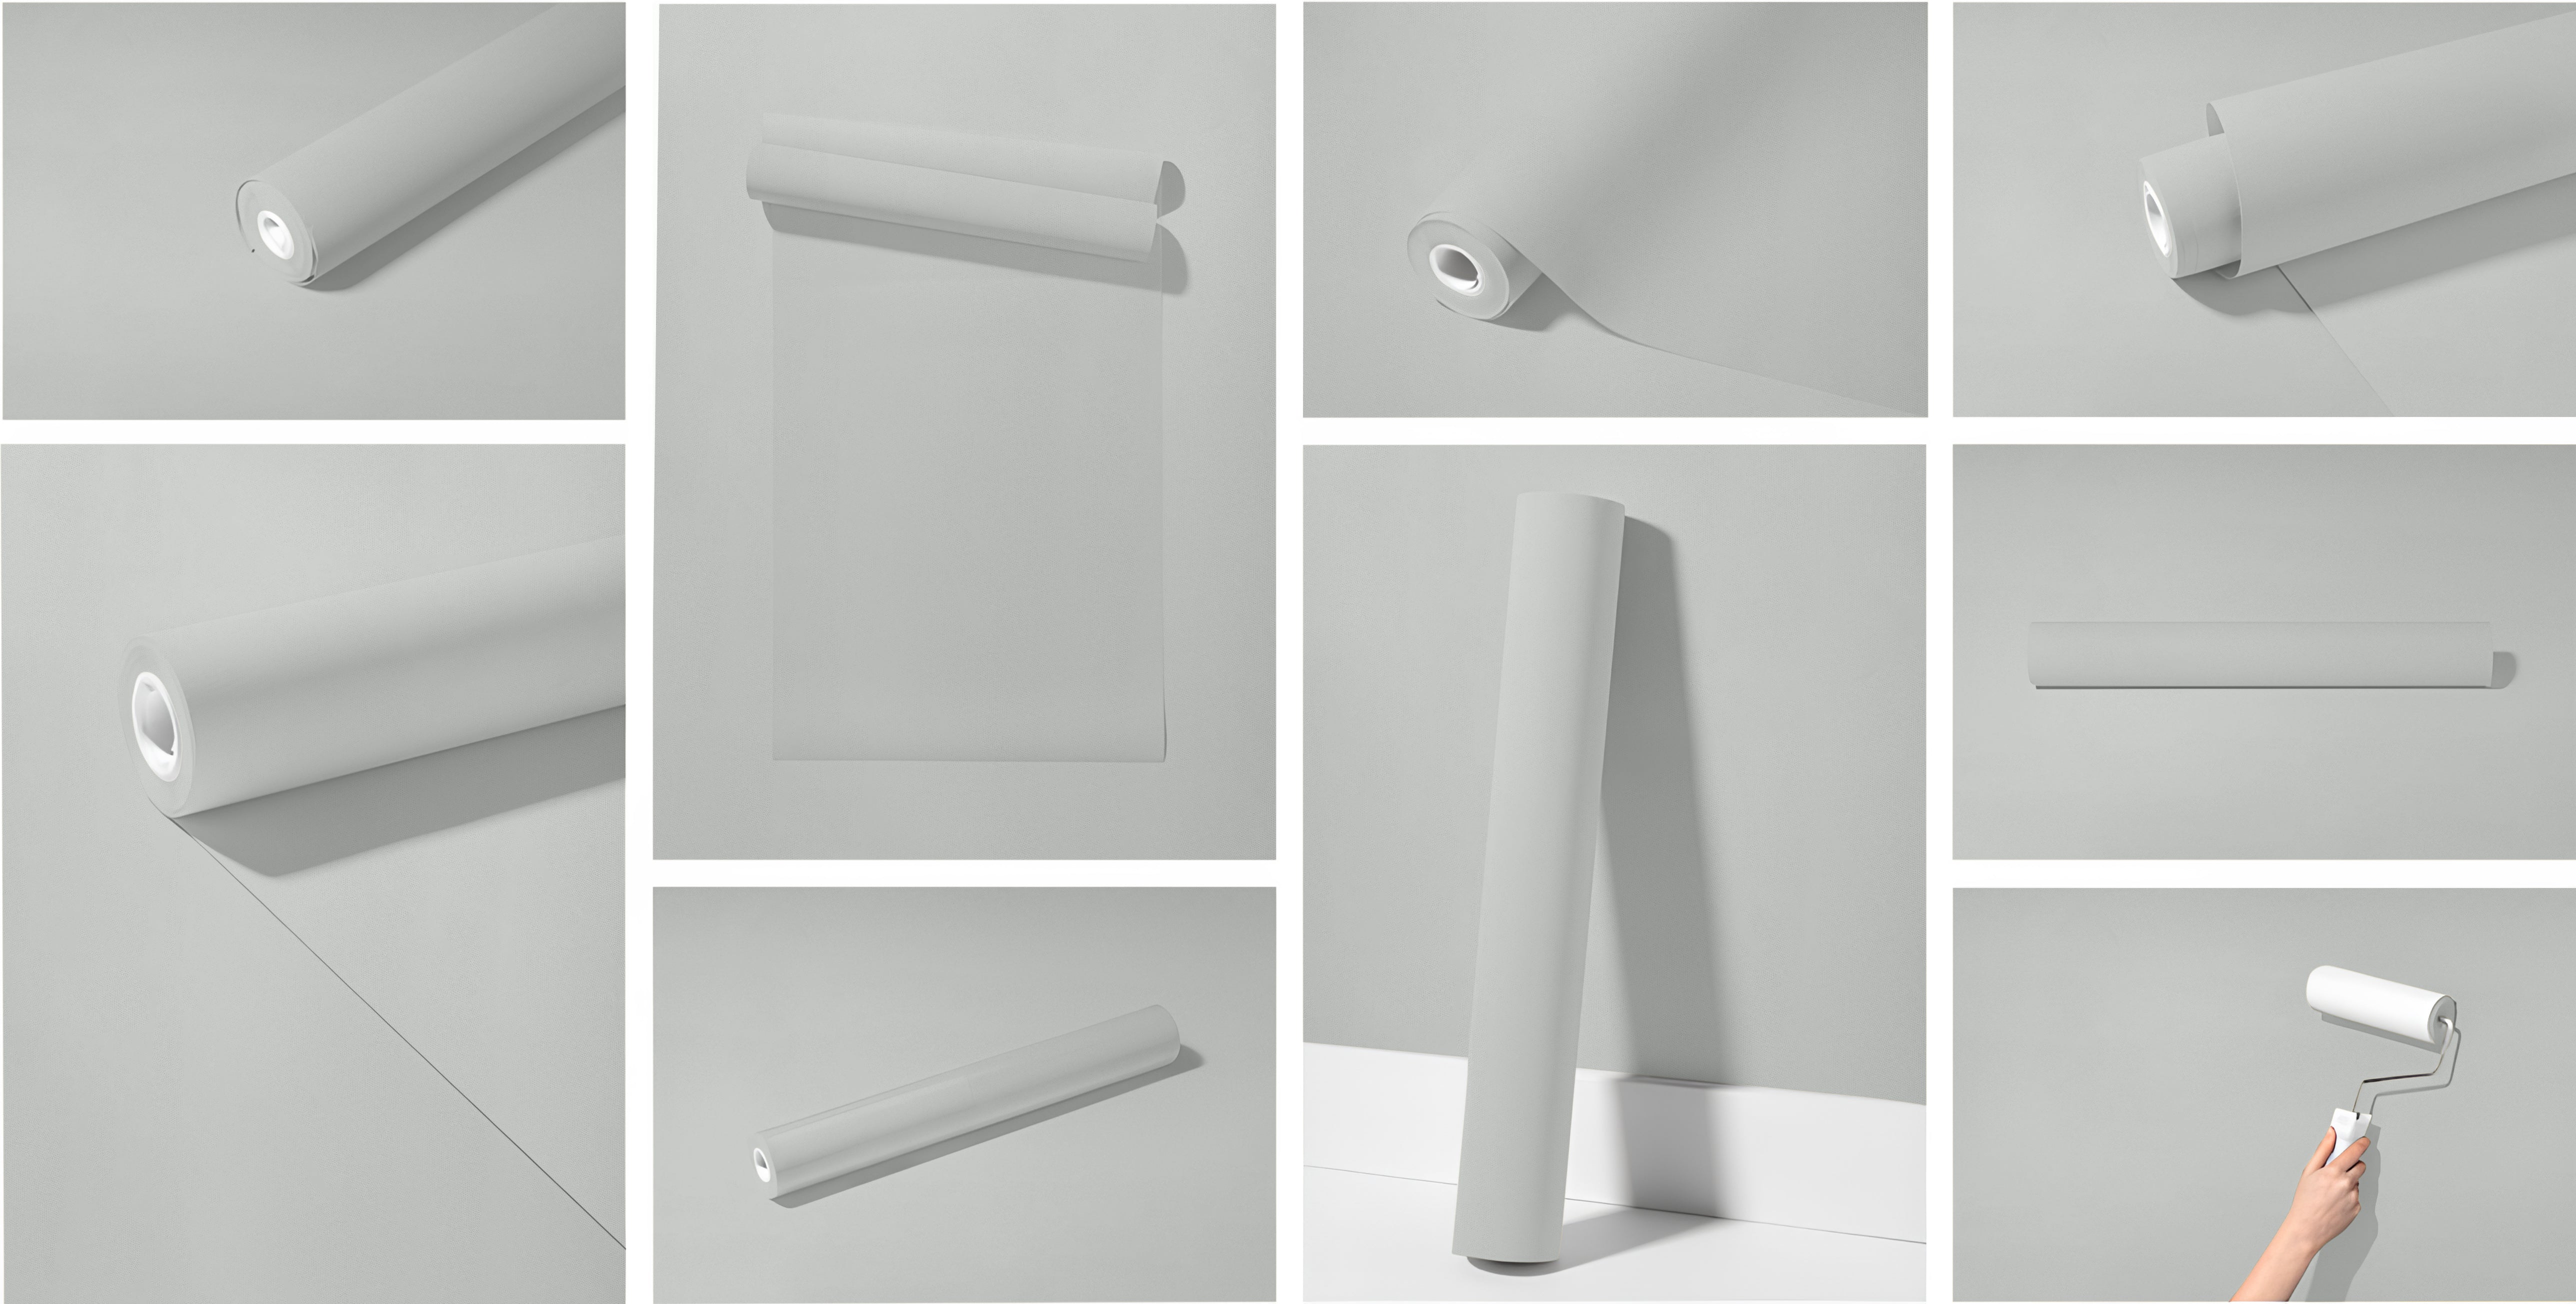 Peel & Stick Removable Re-usable Paint - Color RAL 7035 Light Grey - offRAL™ - RALRAW LLC, USA